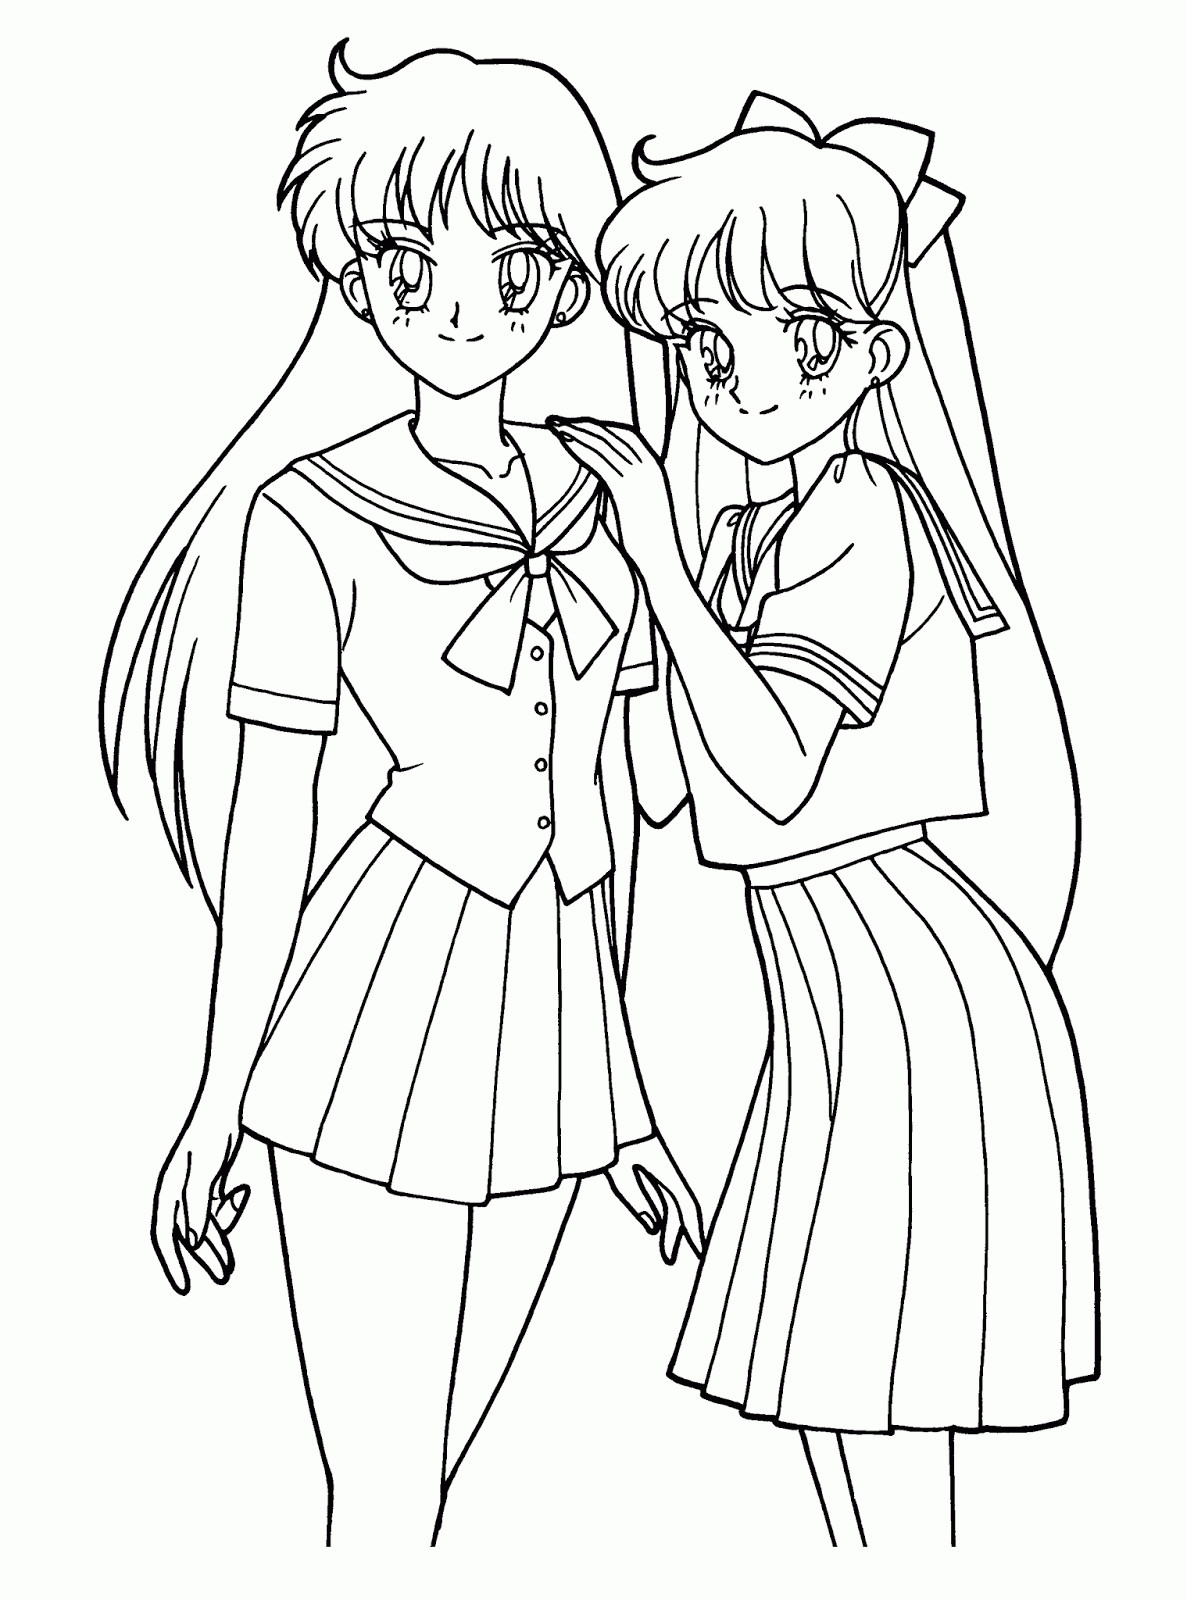 Anime Coloring Pages Girl
 Anime Coloring Pages Best Coloring Pages For Kids